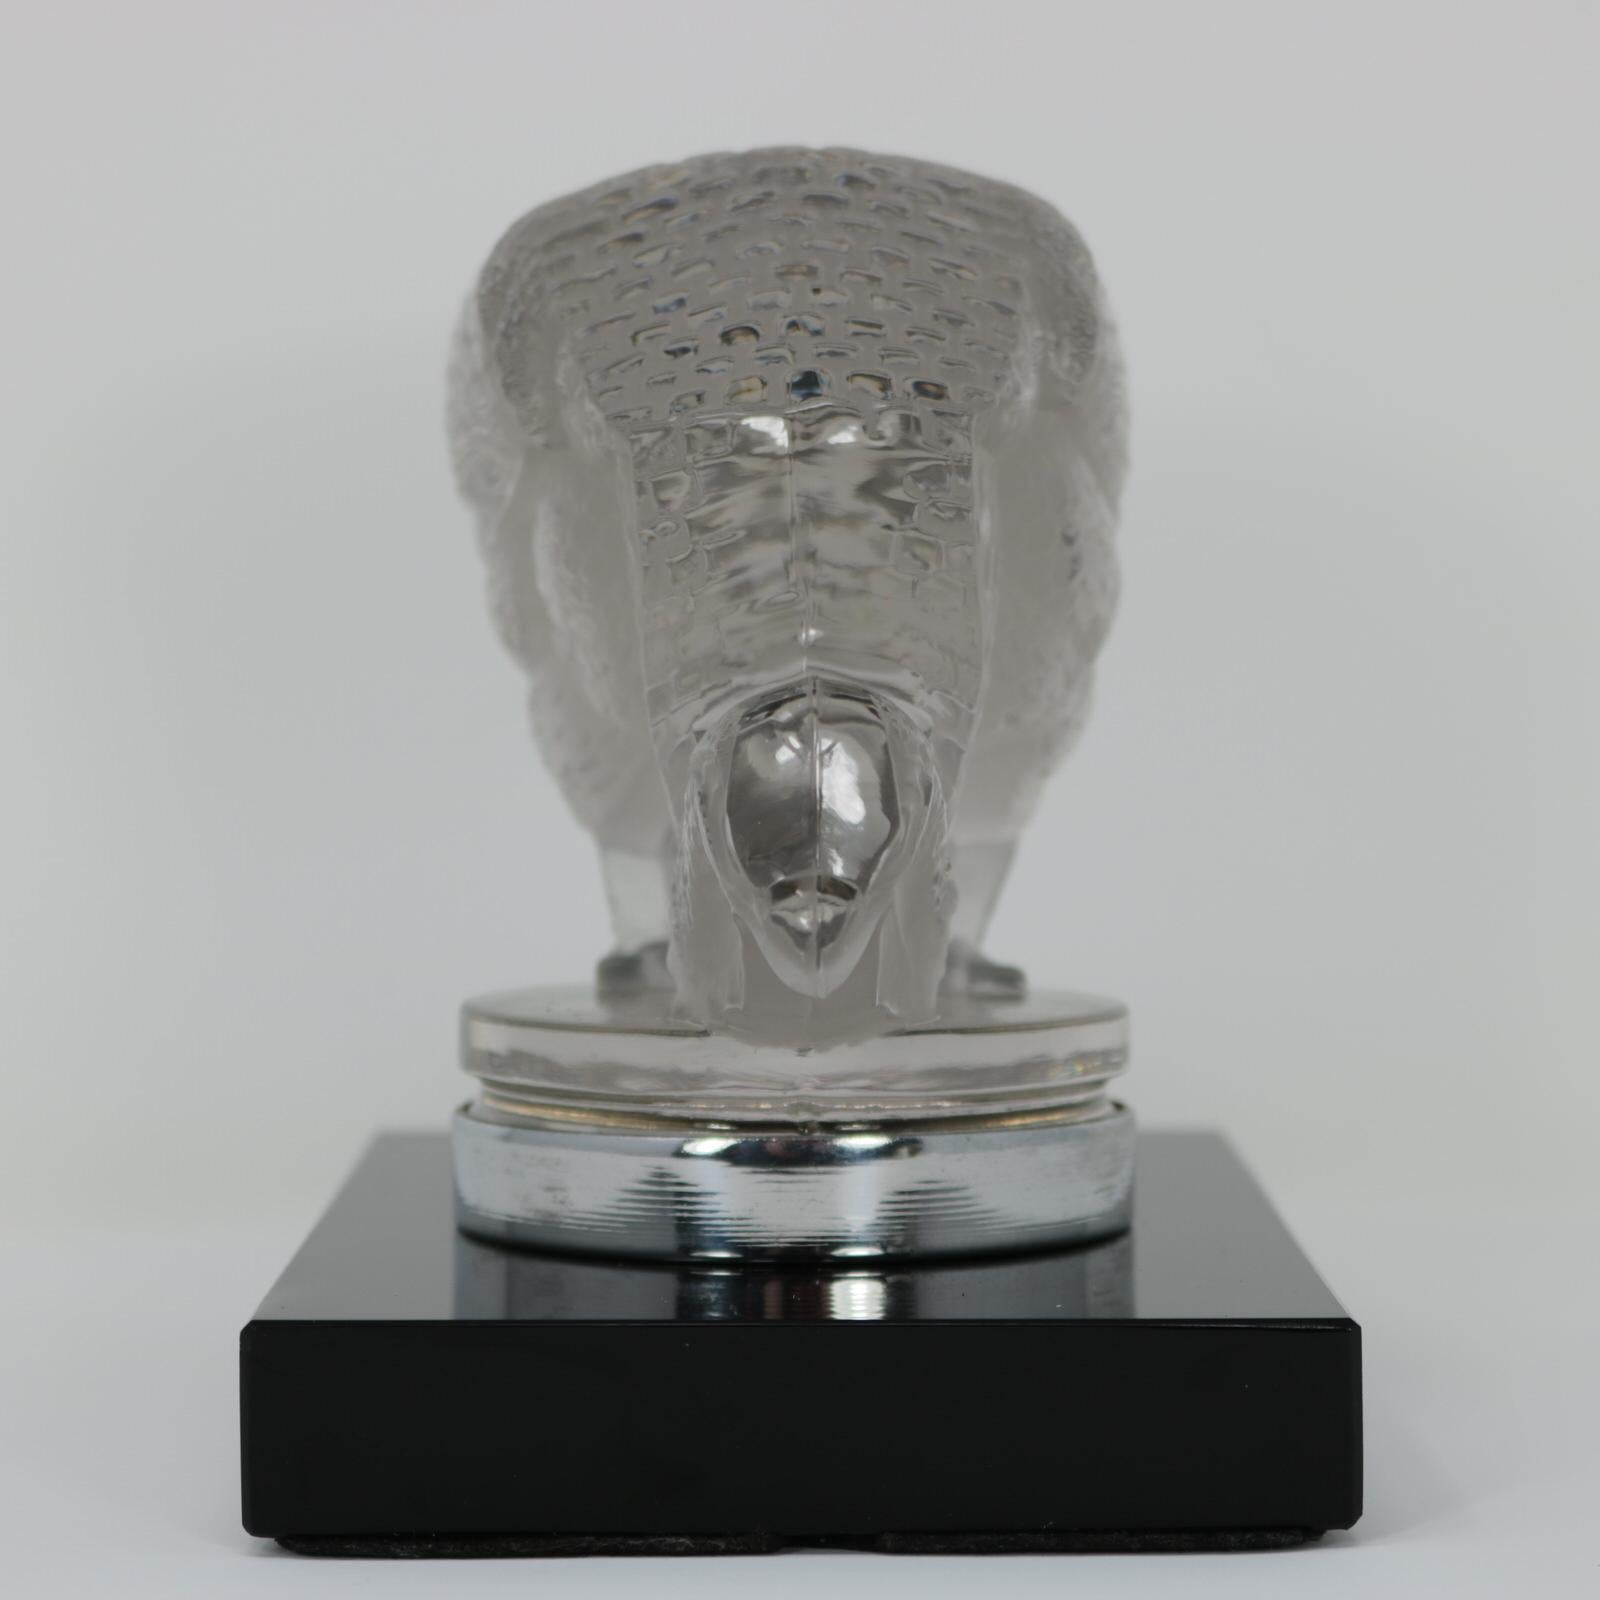 René Lalique clear & frosted glass 'Pintade' car mascot. This model features a grazing guinea fowl bird. The bird is mounted onto a rectangular, black glass base. Moulded maker's mark in front of bird's right foot, 'R LALIQUE' and 'FRANCE' on